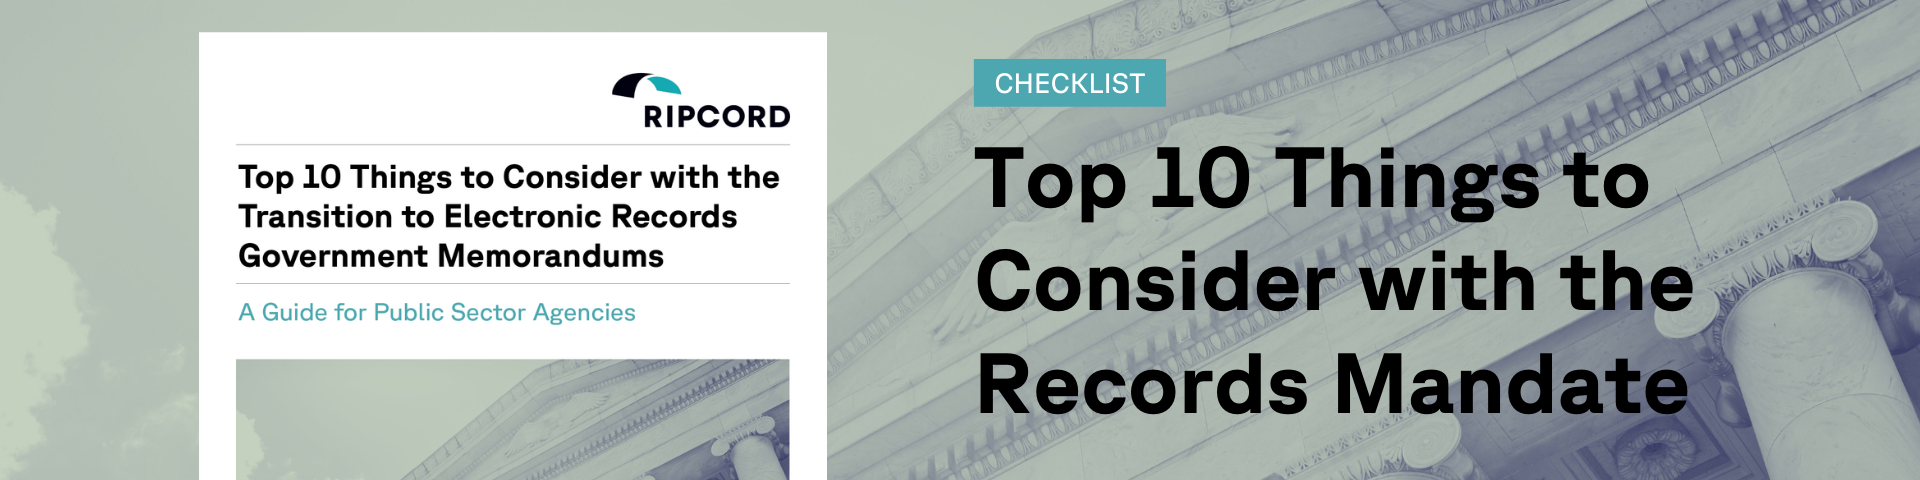 Banner Image - Top 10 Things to Consider with the Transition to Electronic Records Government Memorandums Checklist (1)